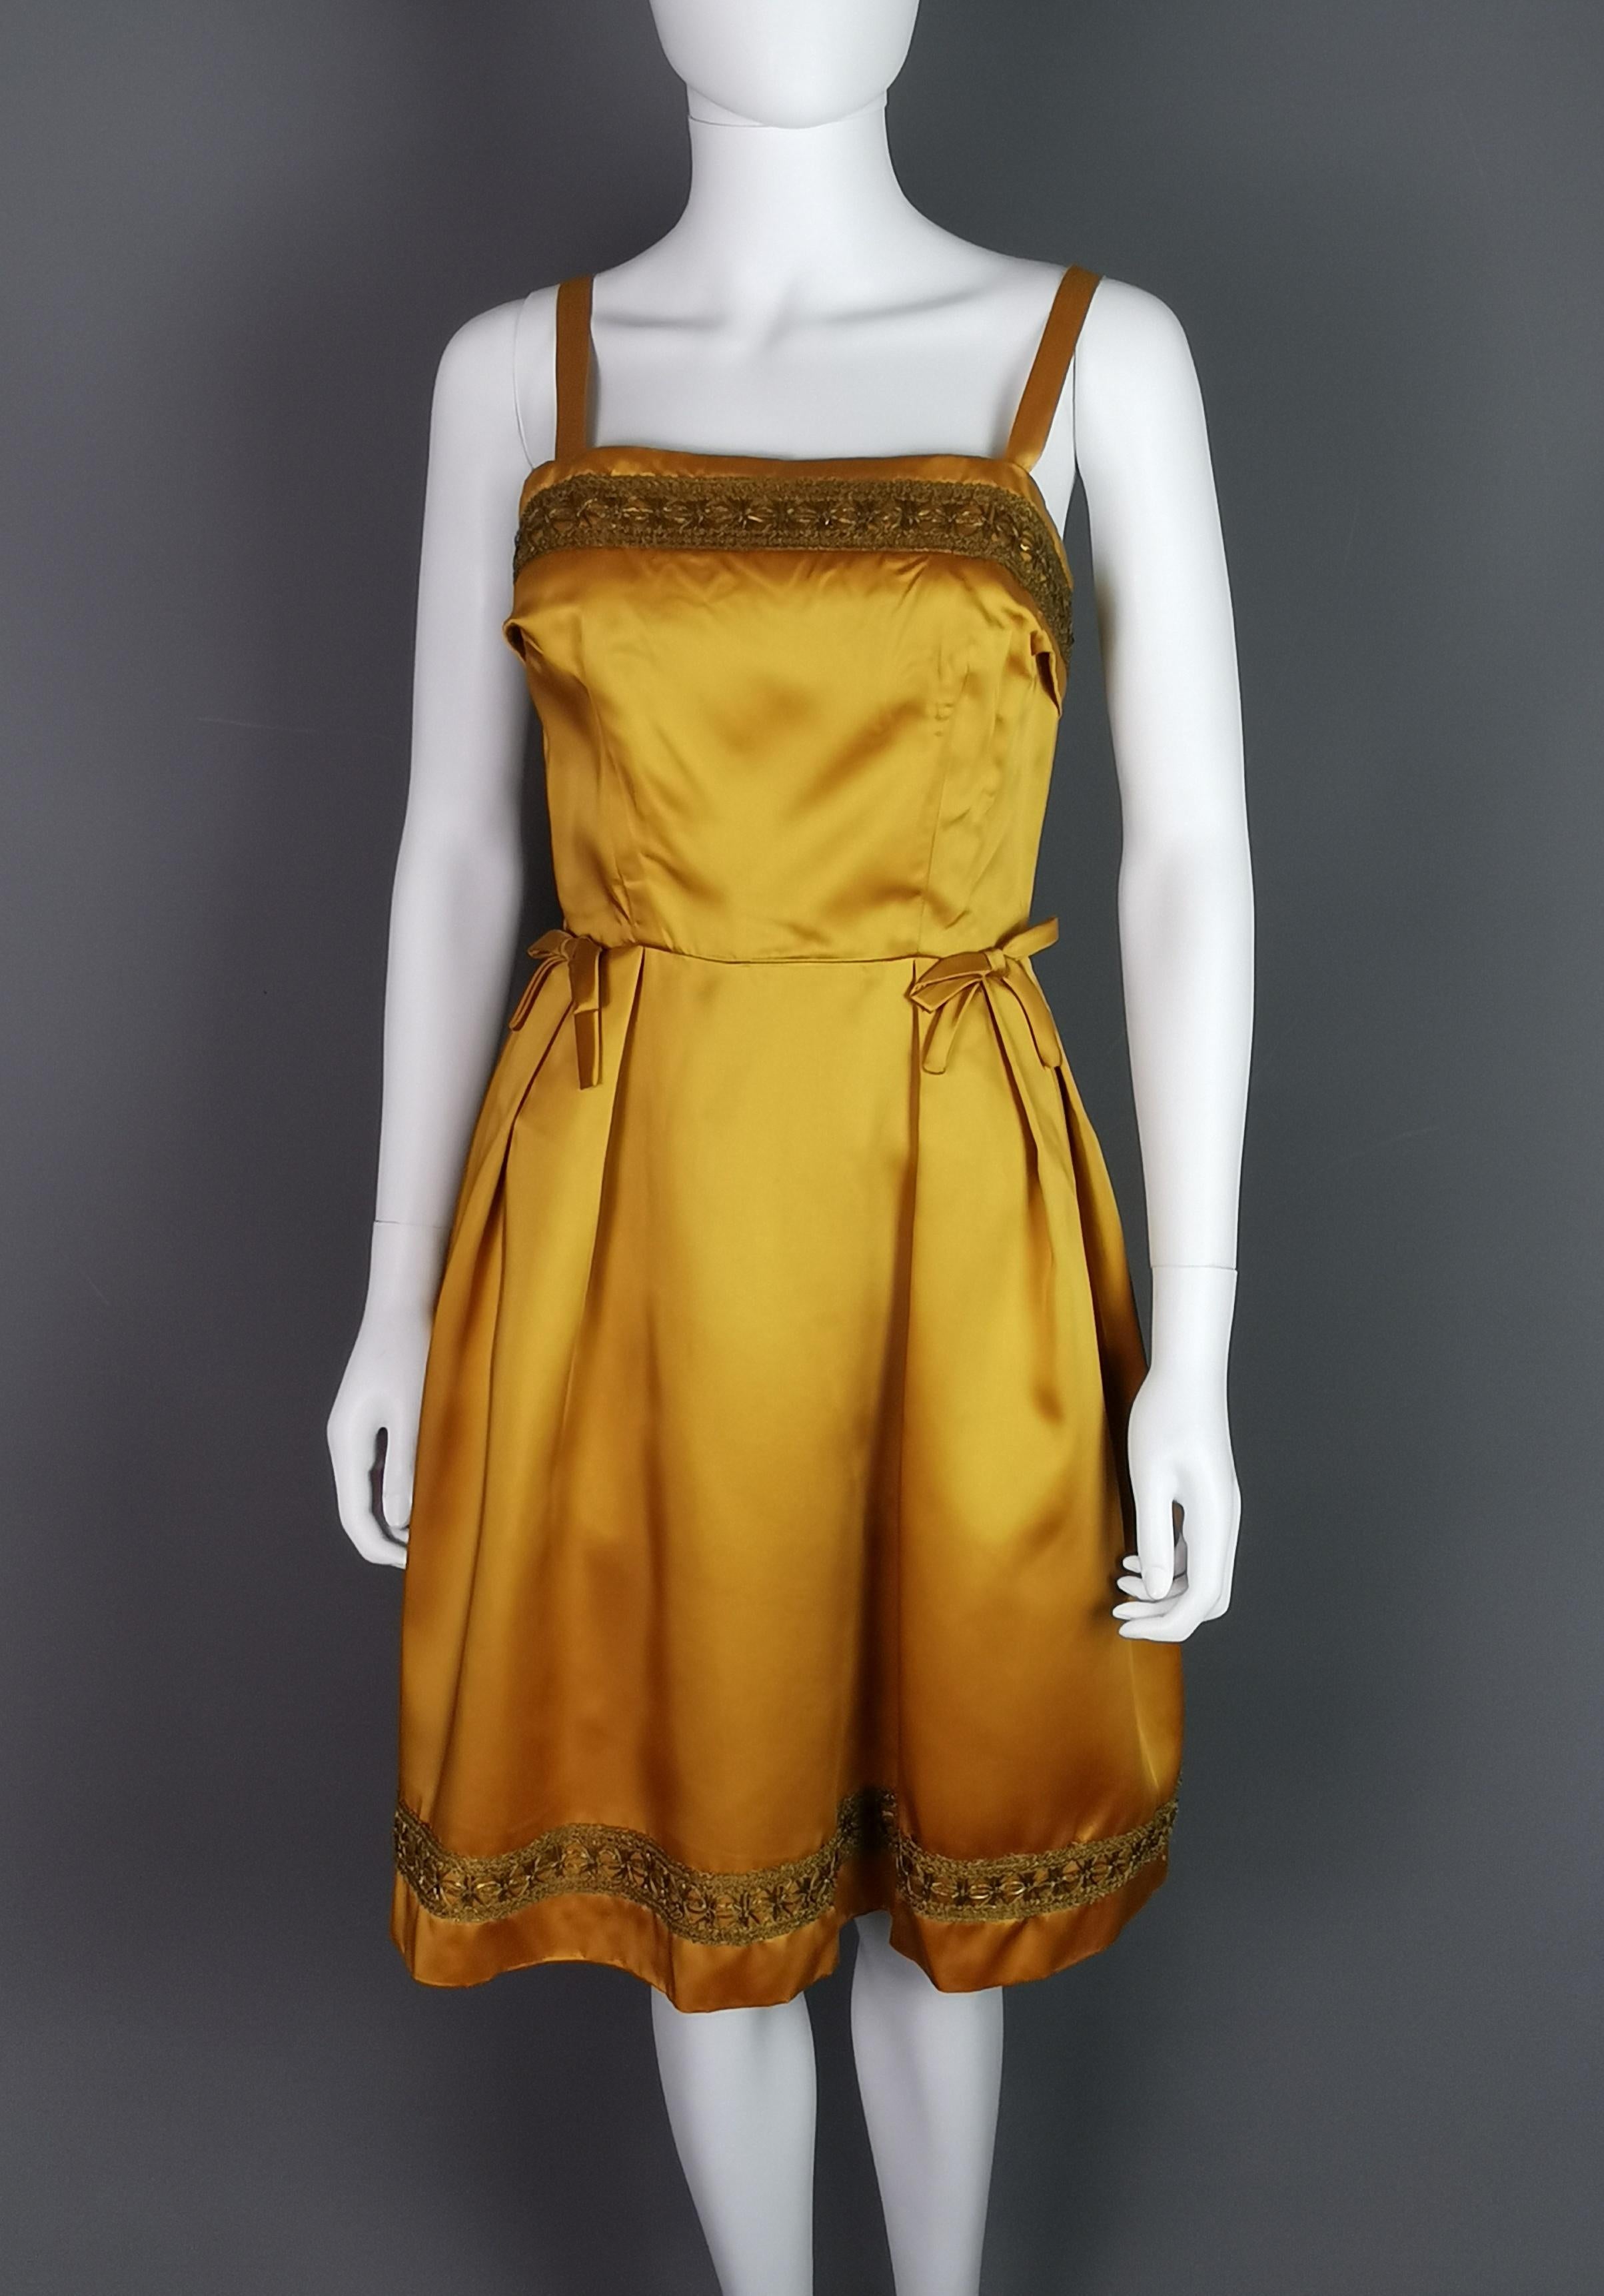 A most gorgeous vintage early 1960s cocktail dress by Kitty Copeland.

Made from a heavy copper / gold satin fabric and fully lined with the original lining.

It is a sleeveless dress with medium thickness of straps and a gorgeous rich gold bullion